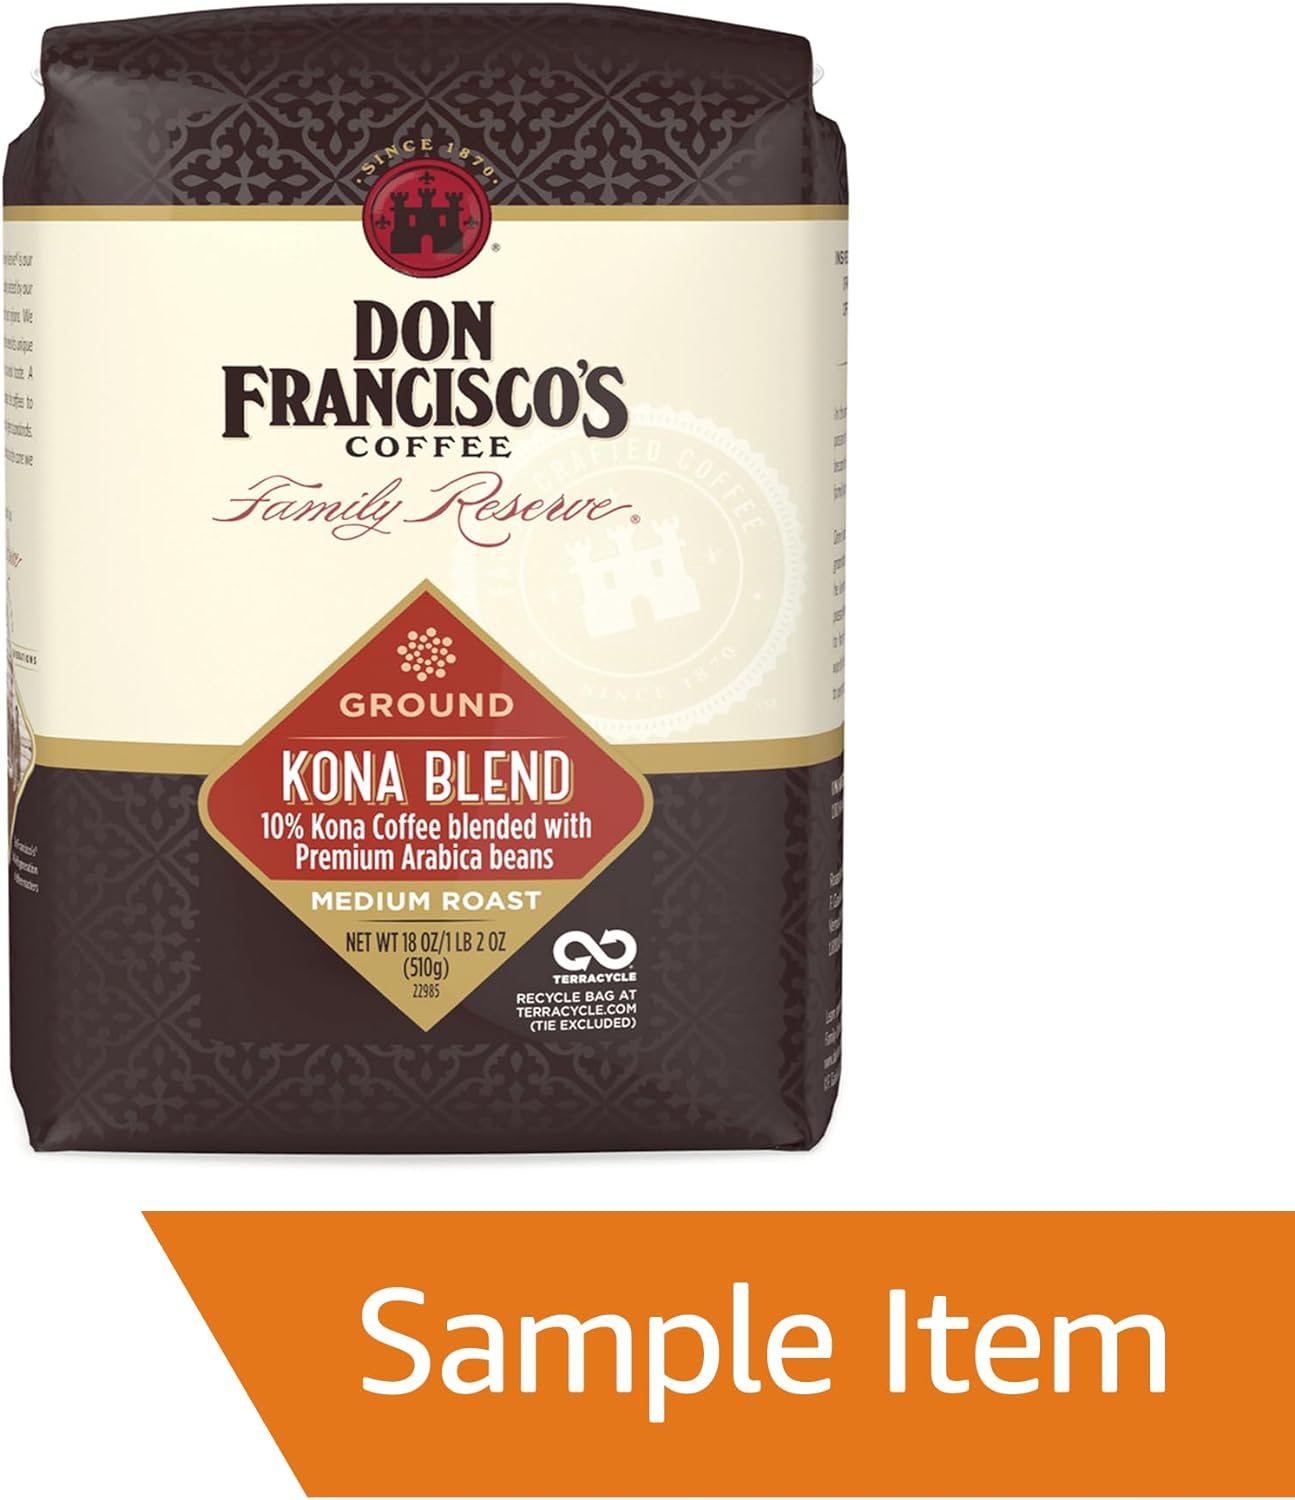 Don Francisco's Ground Coffee Selection Subscription Club